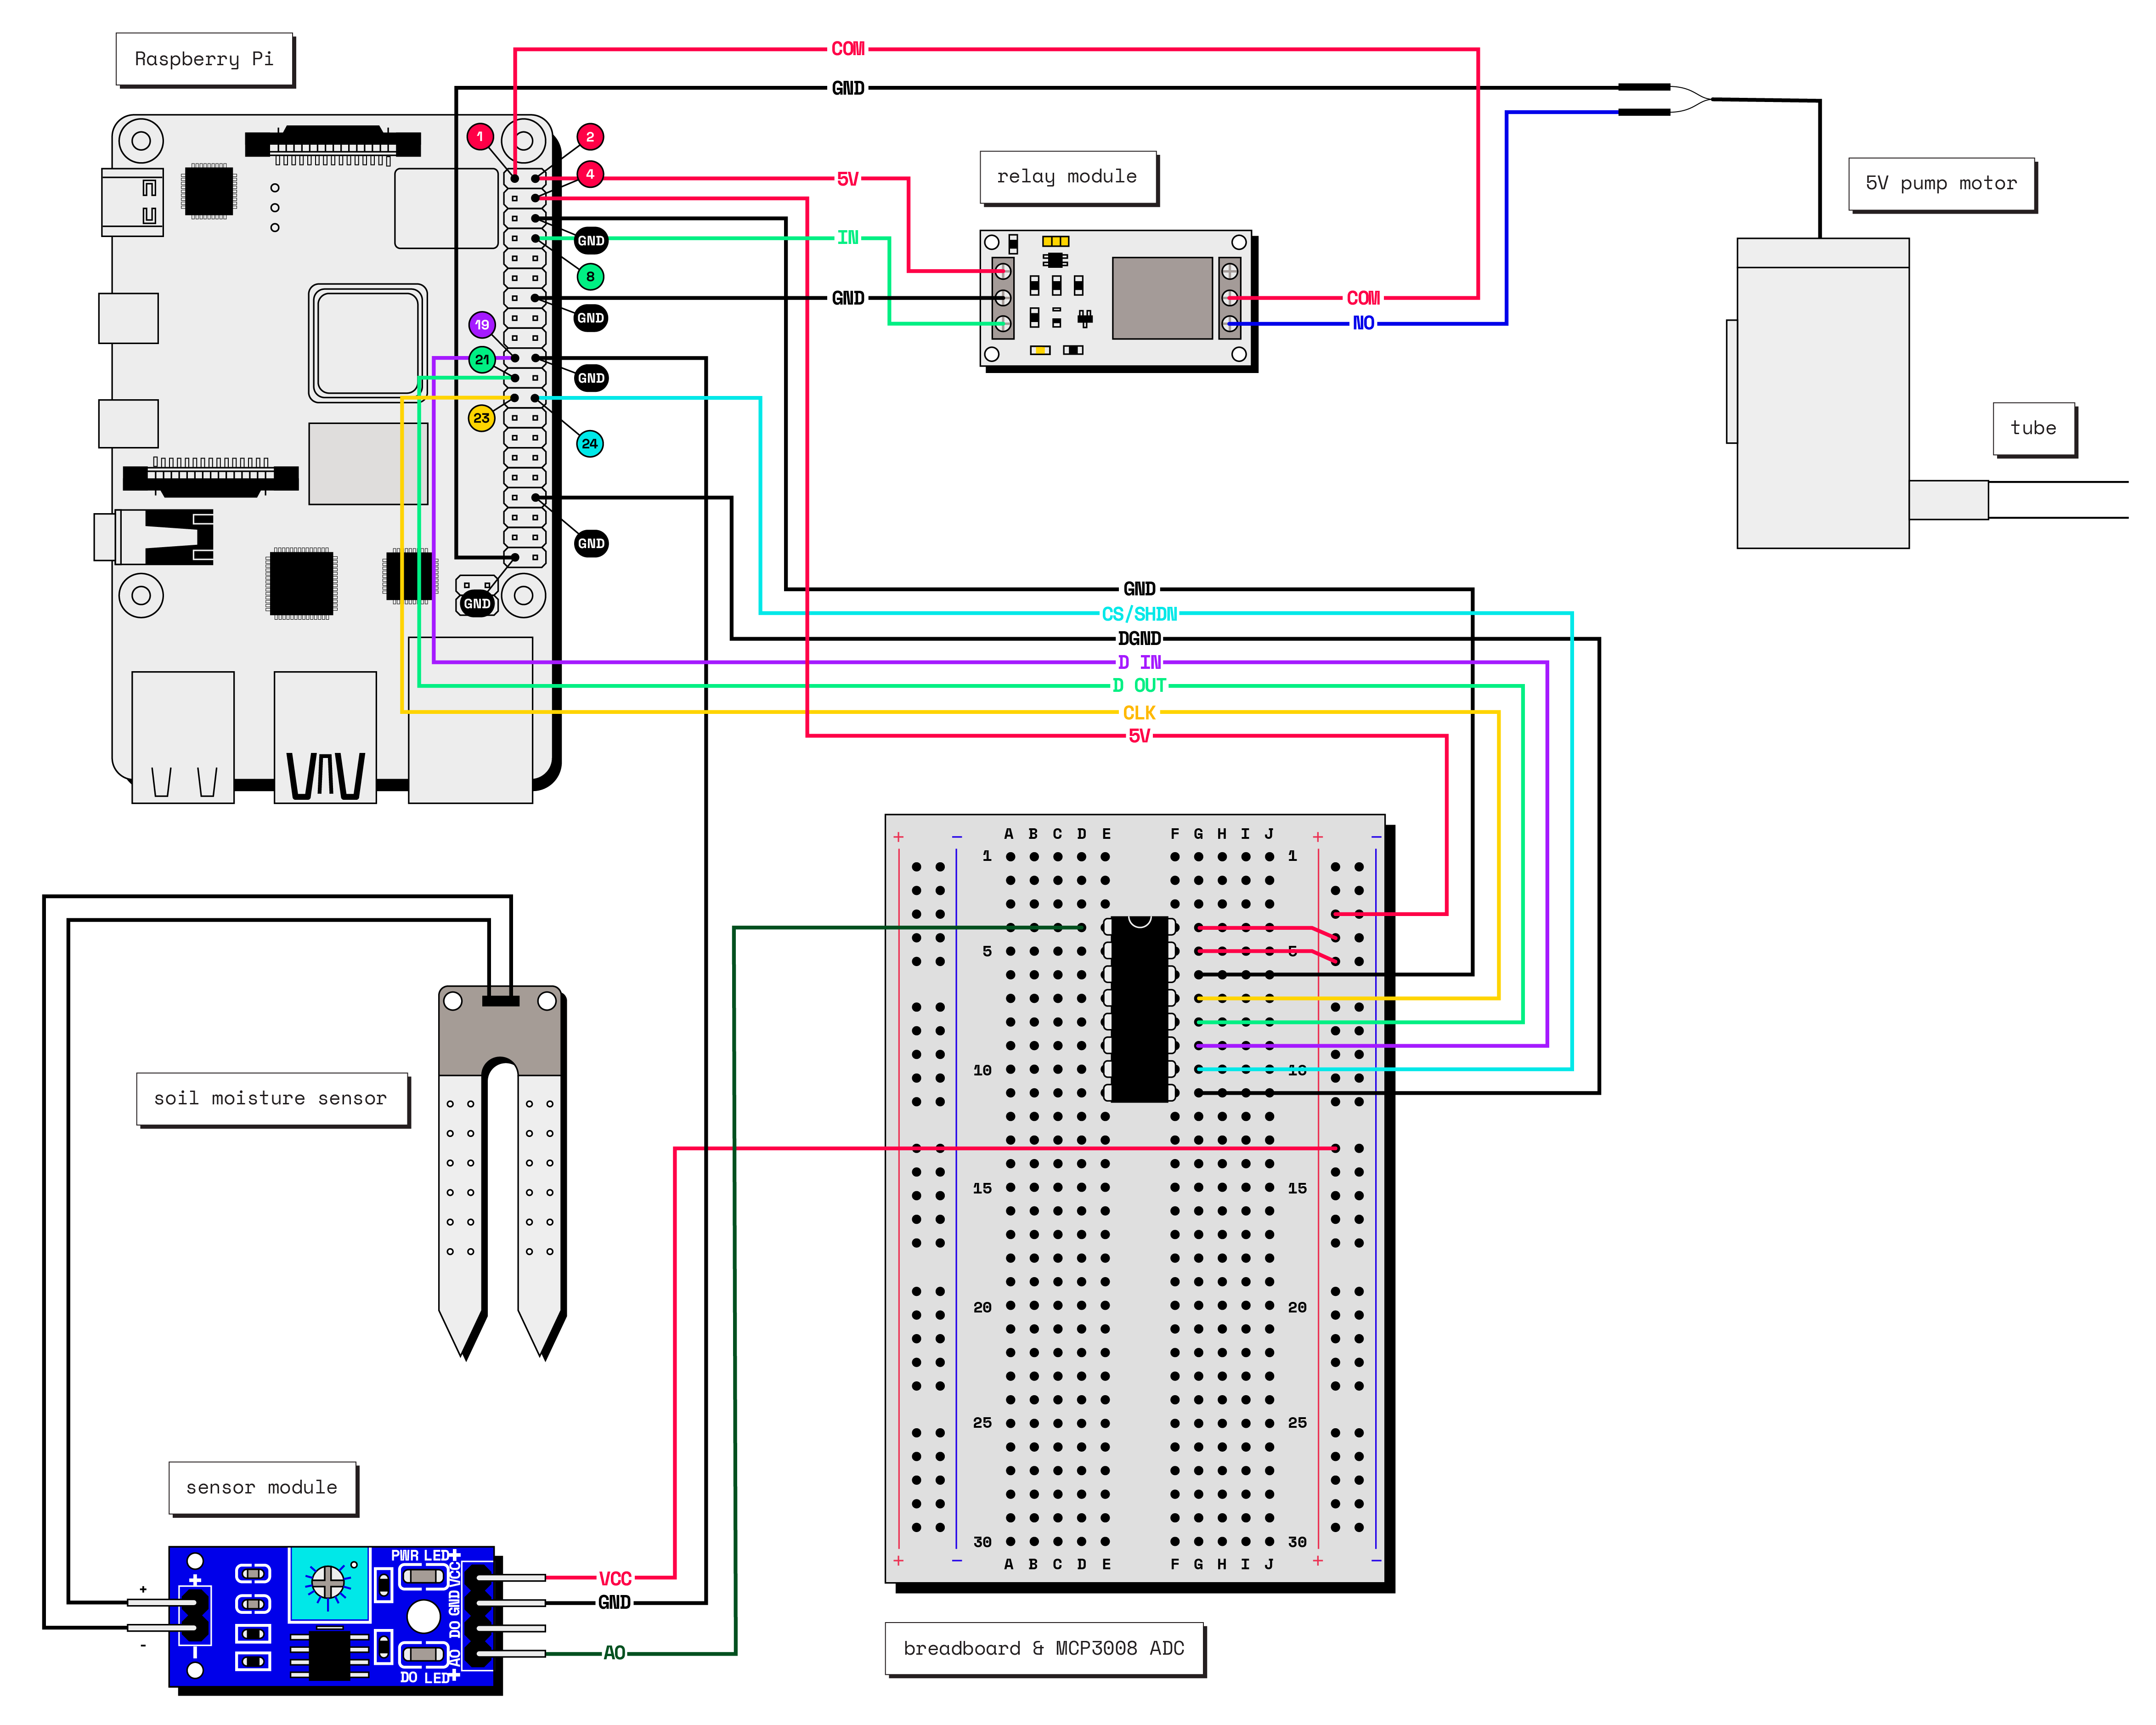 The full wiring diagram for all the hardware for the Plant Watering Robot.